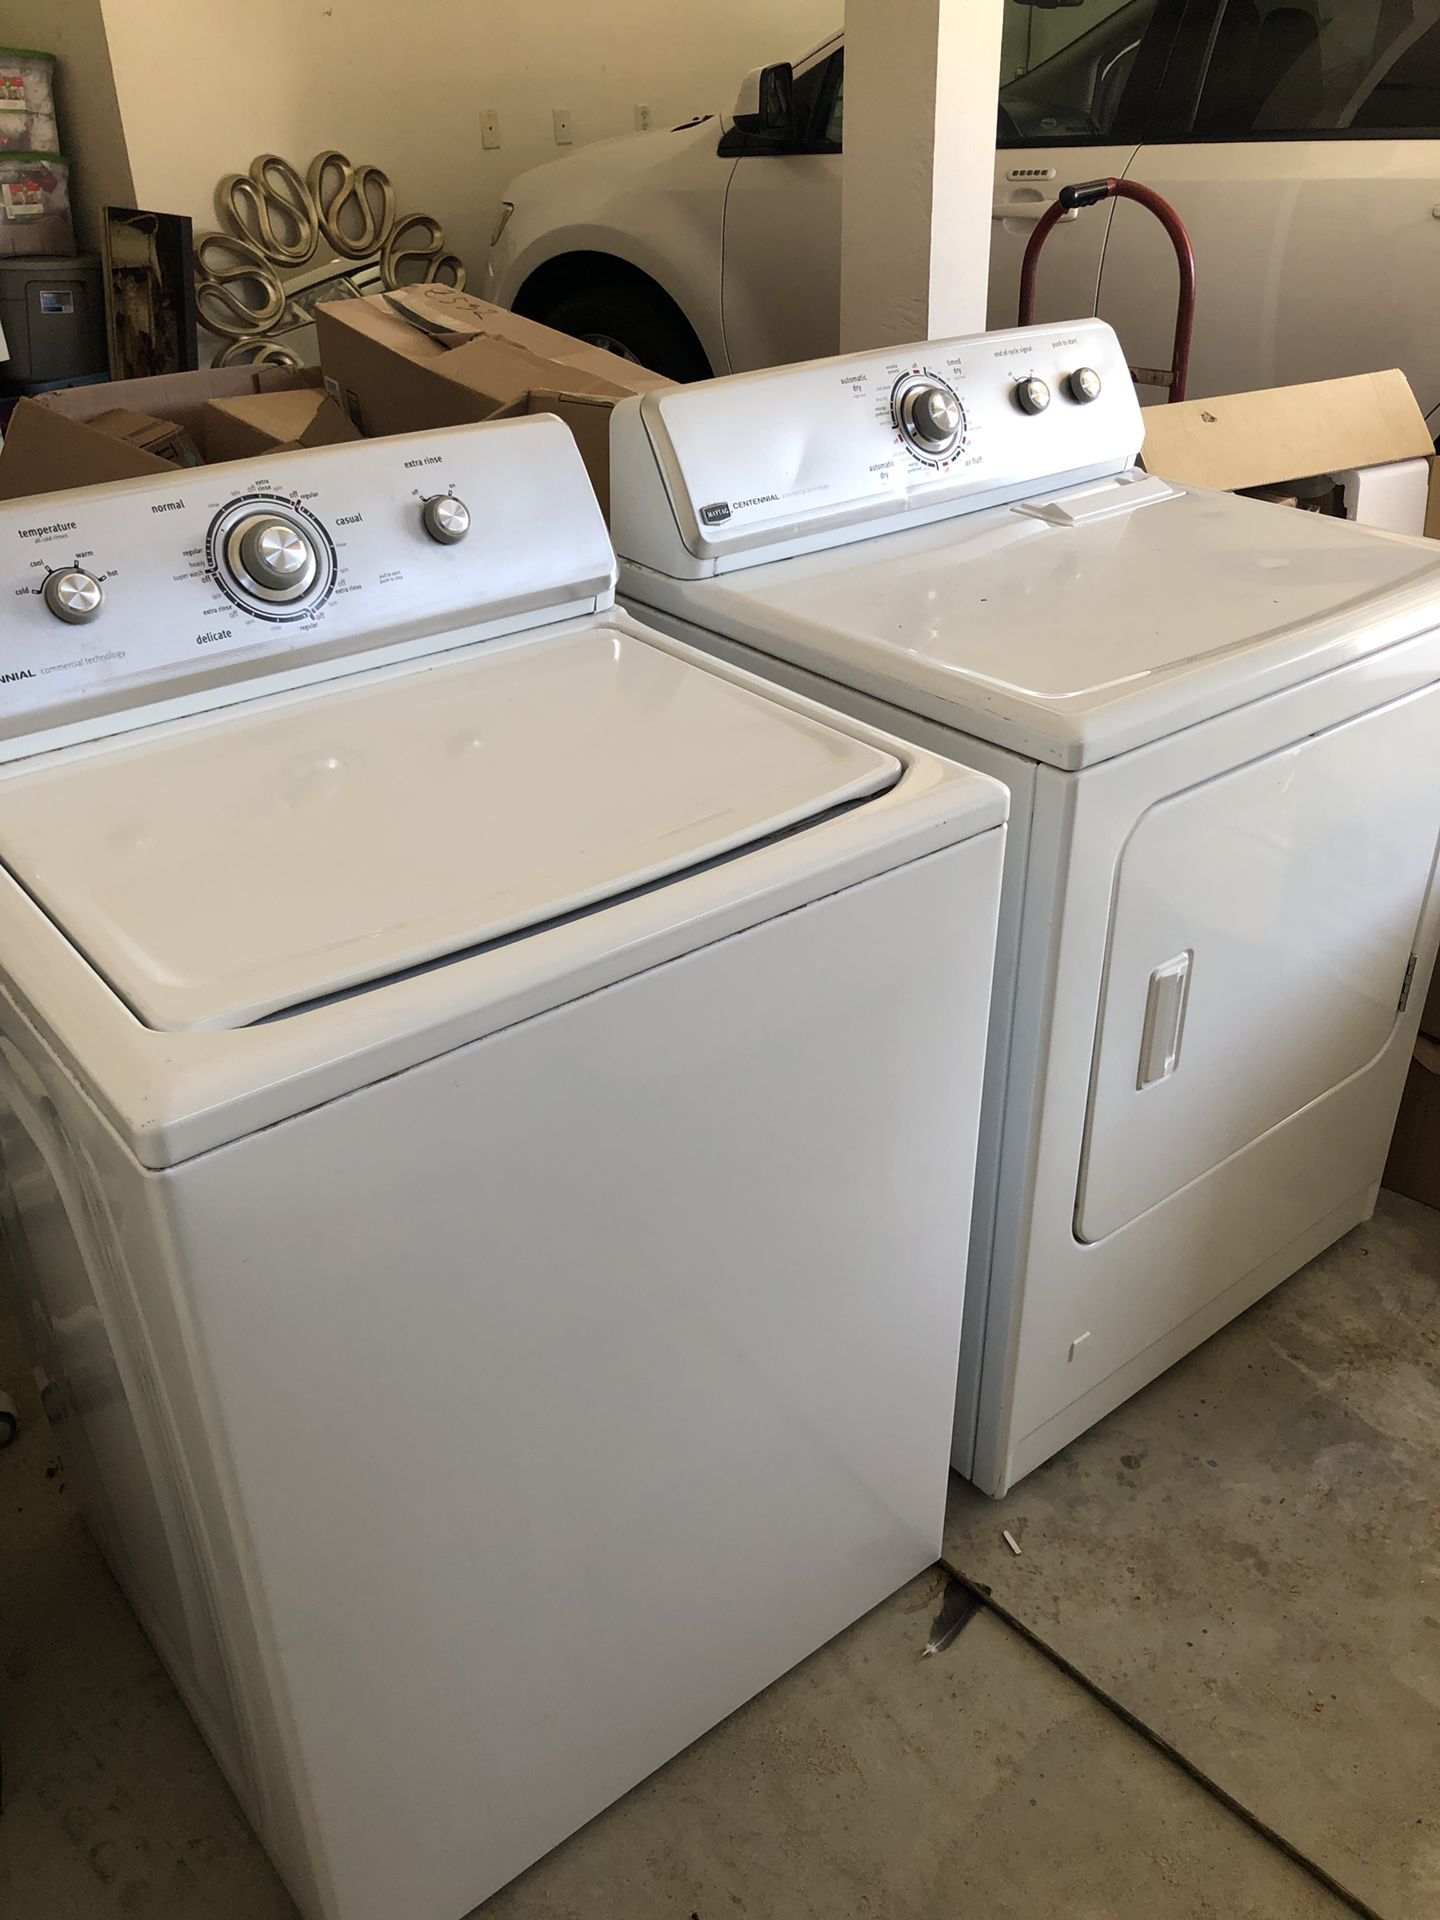 Maytag Centennial, washer and gas dryer. In great condition.